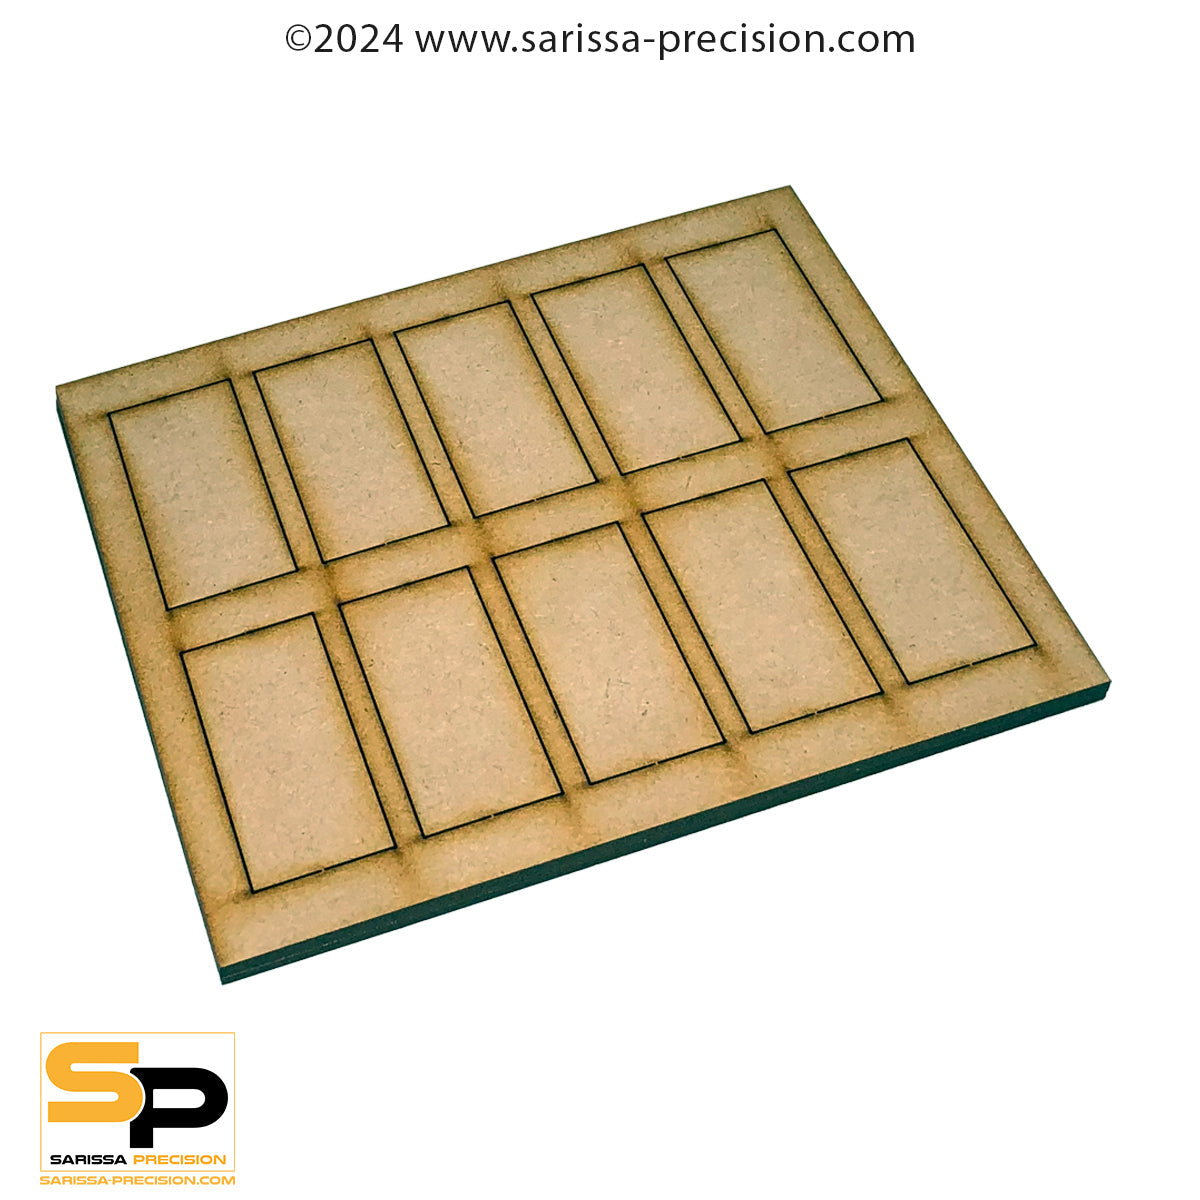 9 x 2 30x60mm Cavalry Conversion Tray for 25x50mm Bases